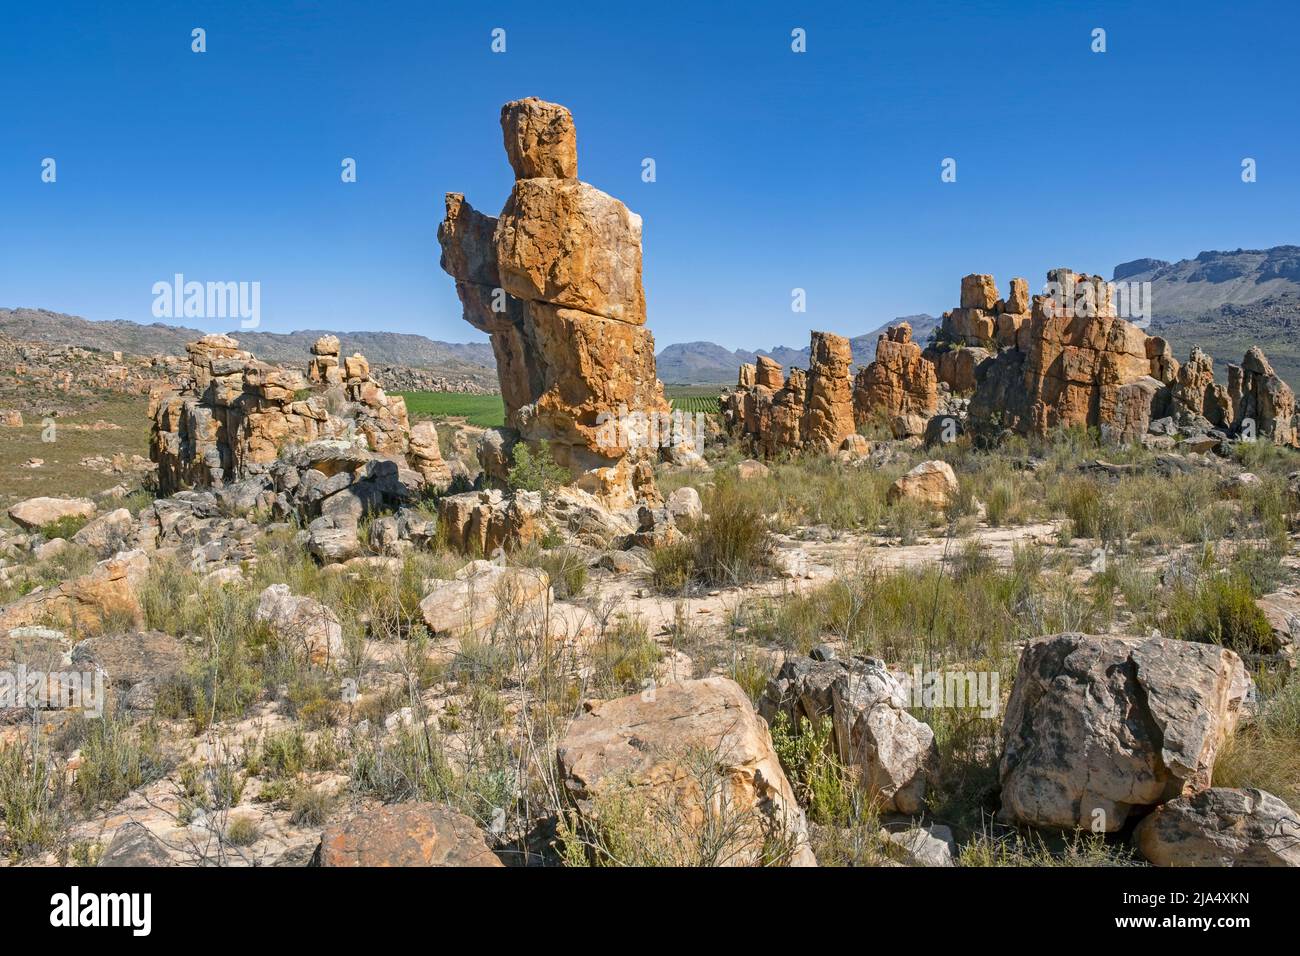 Sandstone rock formations on the Lot's Wife hiking trail at Dwarsrivier, Cederberg mountains near Clanwilliam, Western Cape, South Africa Stock Photo